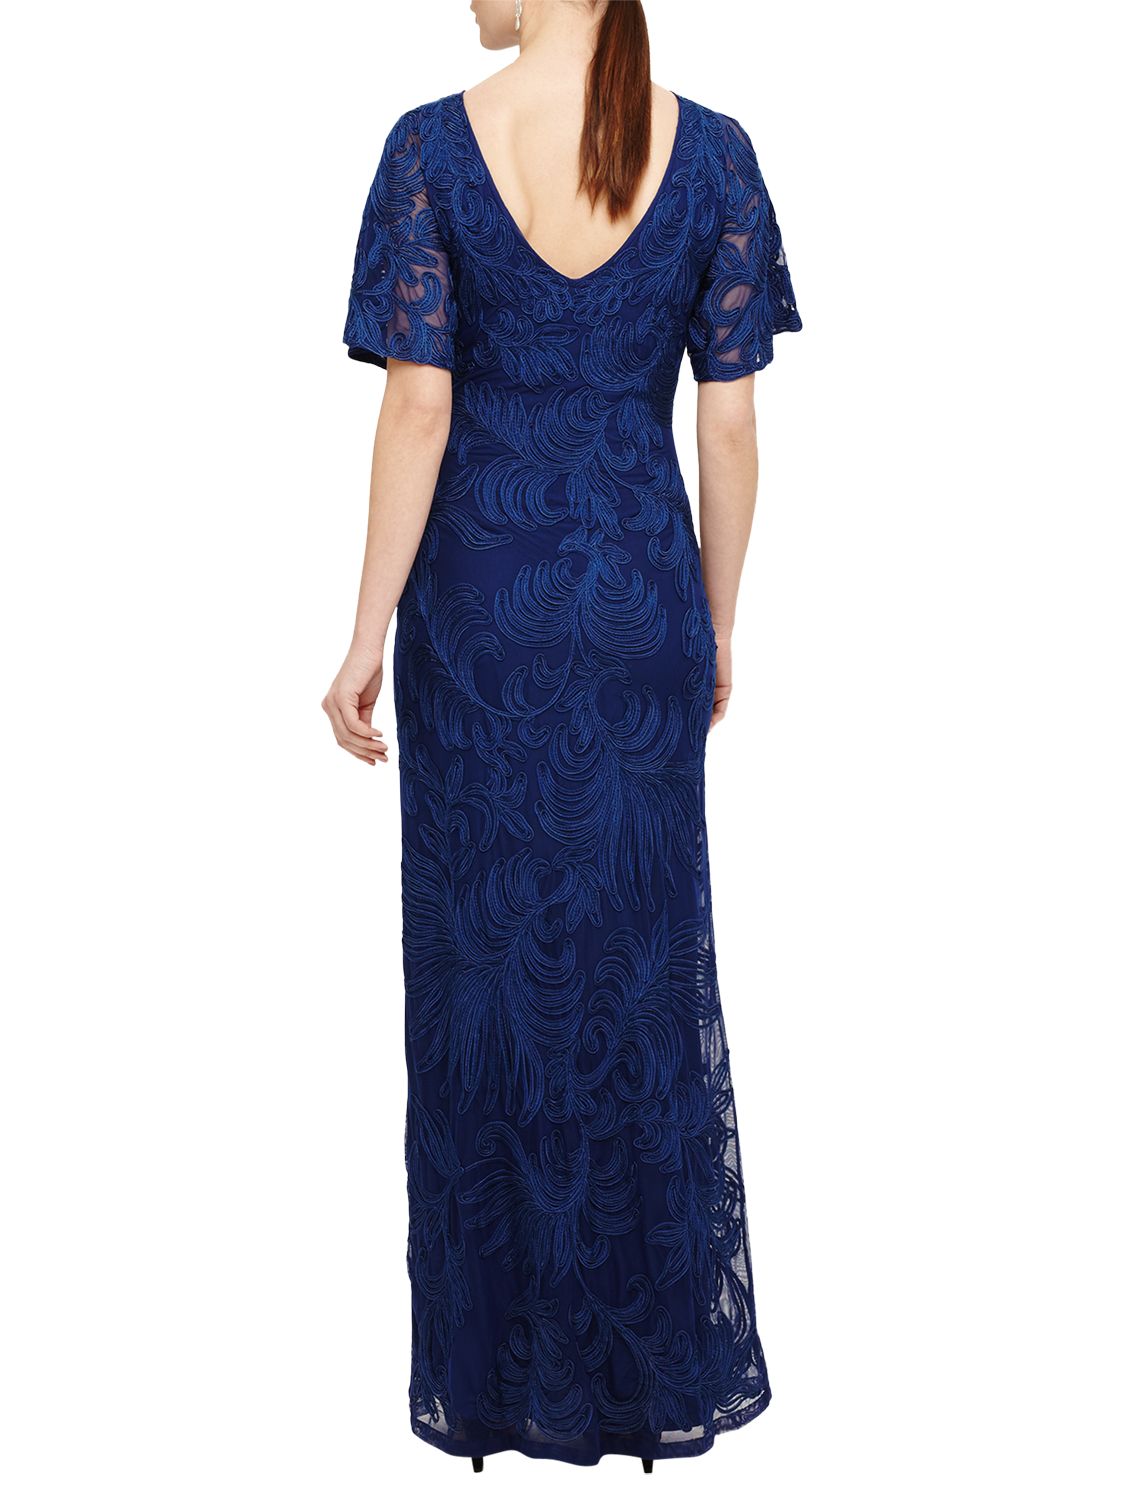 Phase Eight Cecily Tapework Dress, Cobalt Blue